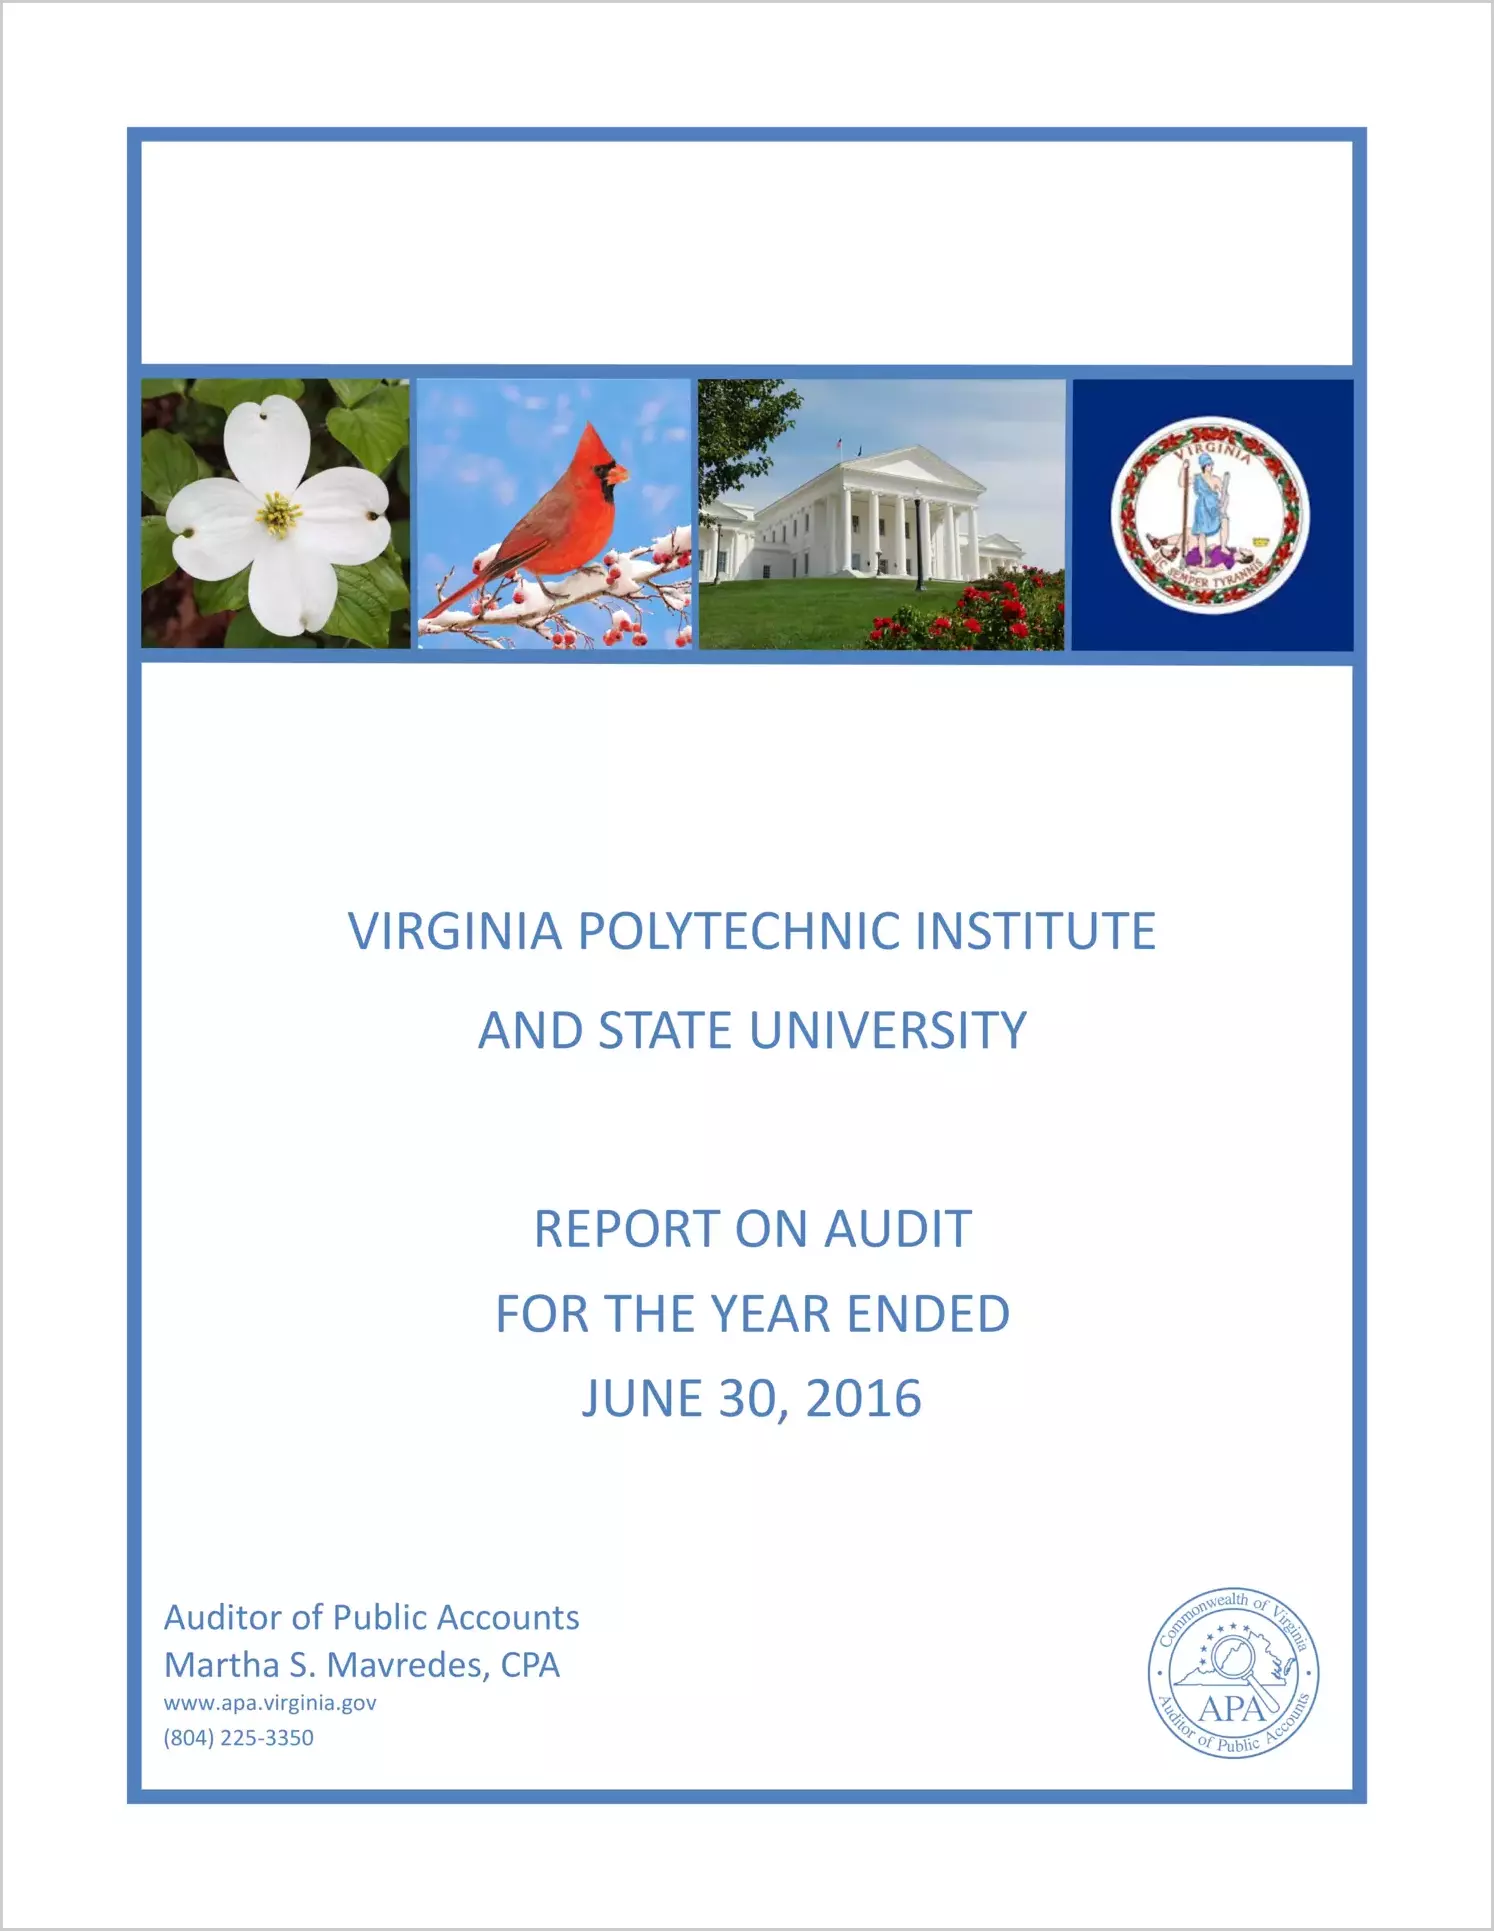 Virginia Polytechnic Institute and State University for the year ended June 30, 2016